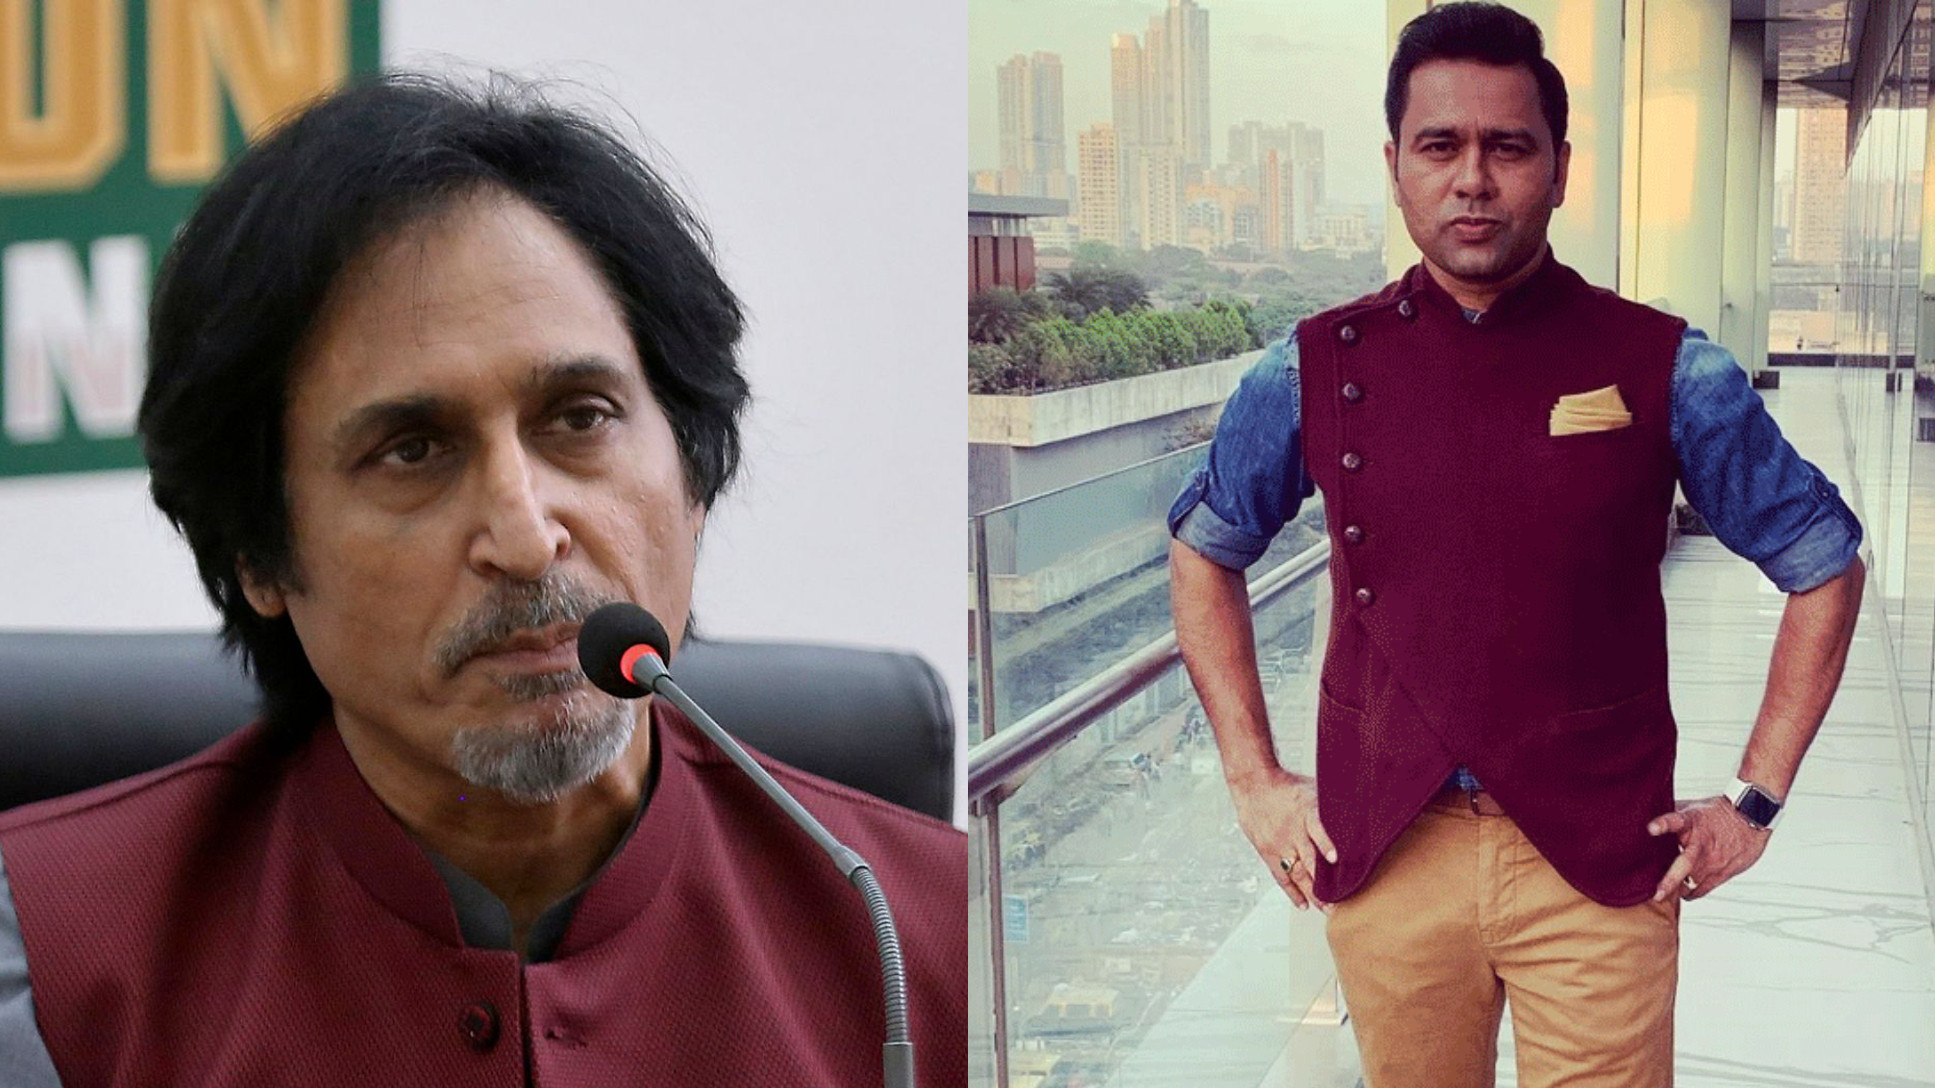 No player will get Rs 16 crore bid in PSL auction- Aakash Chopra on Ramiz Raja’s plans of competing with IPL